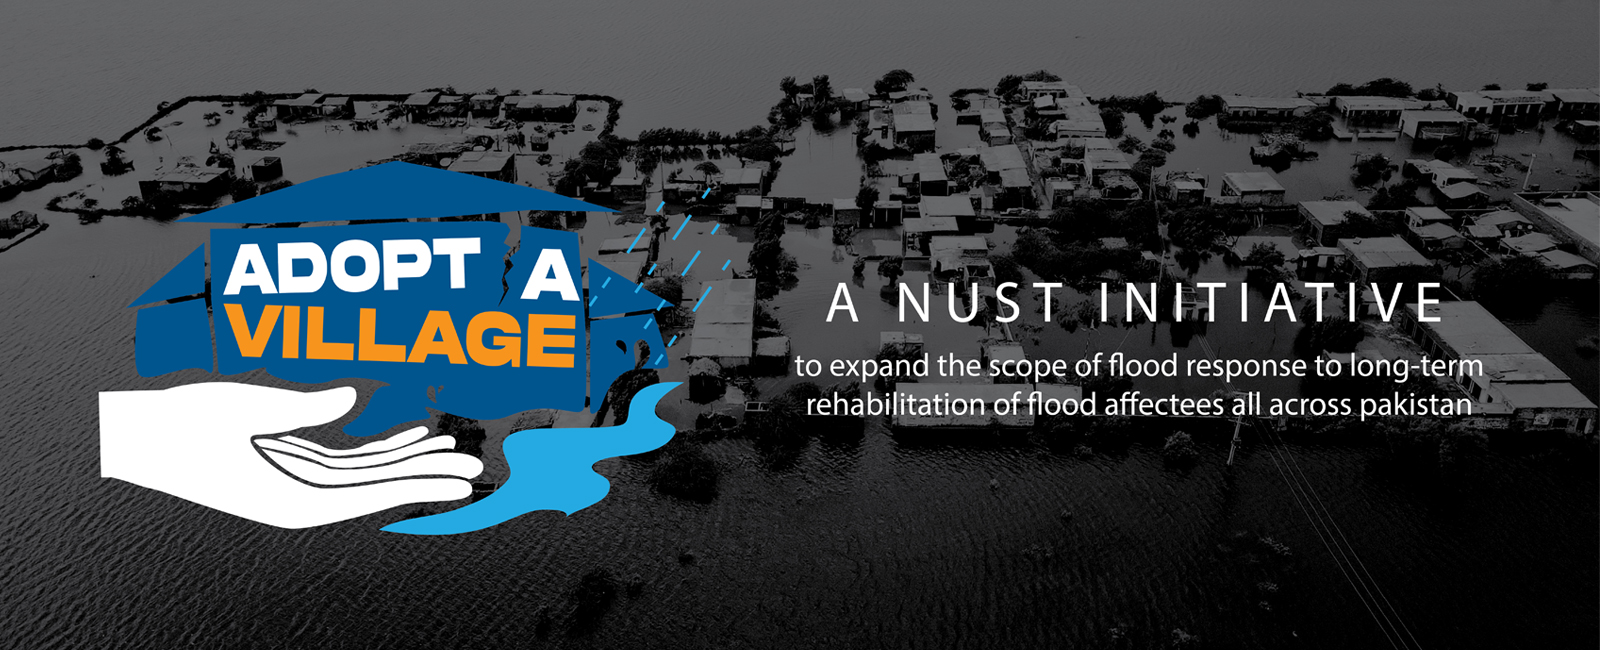 Join Us to Adopt Flood-hit Villages for Revival of Livelihood and Shelter